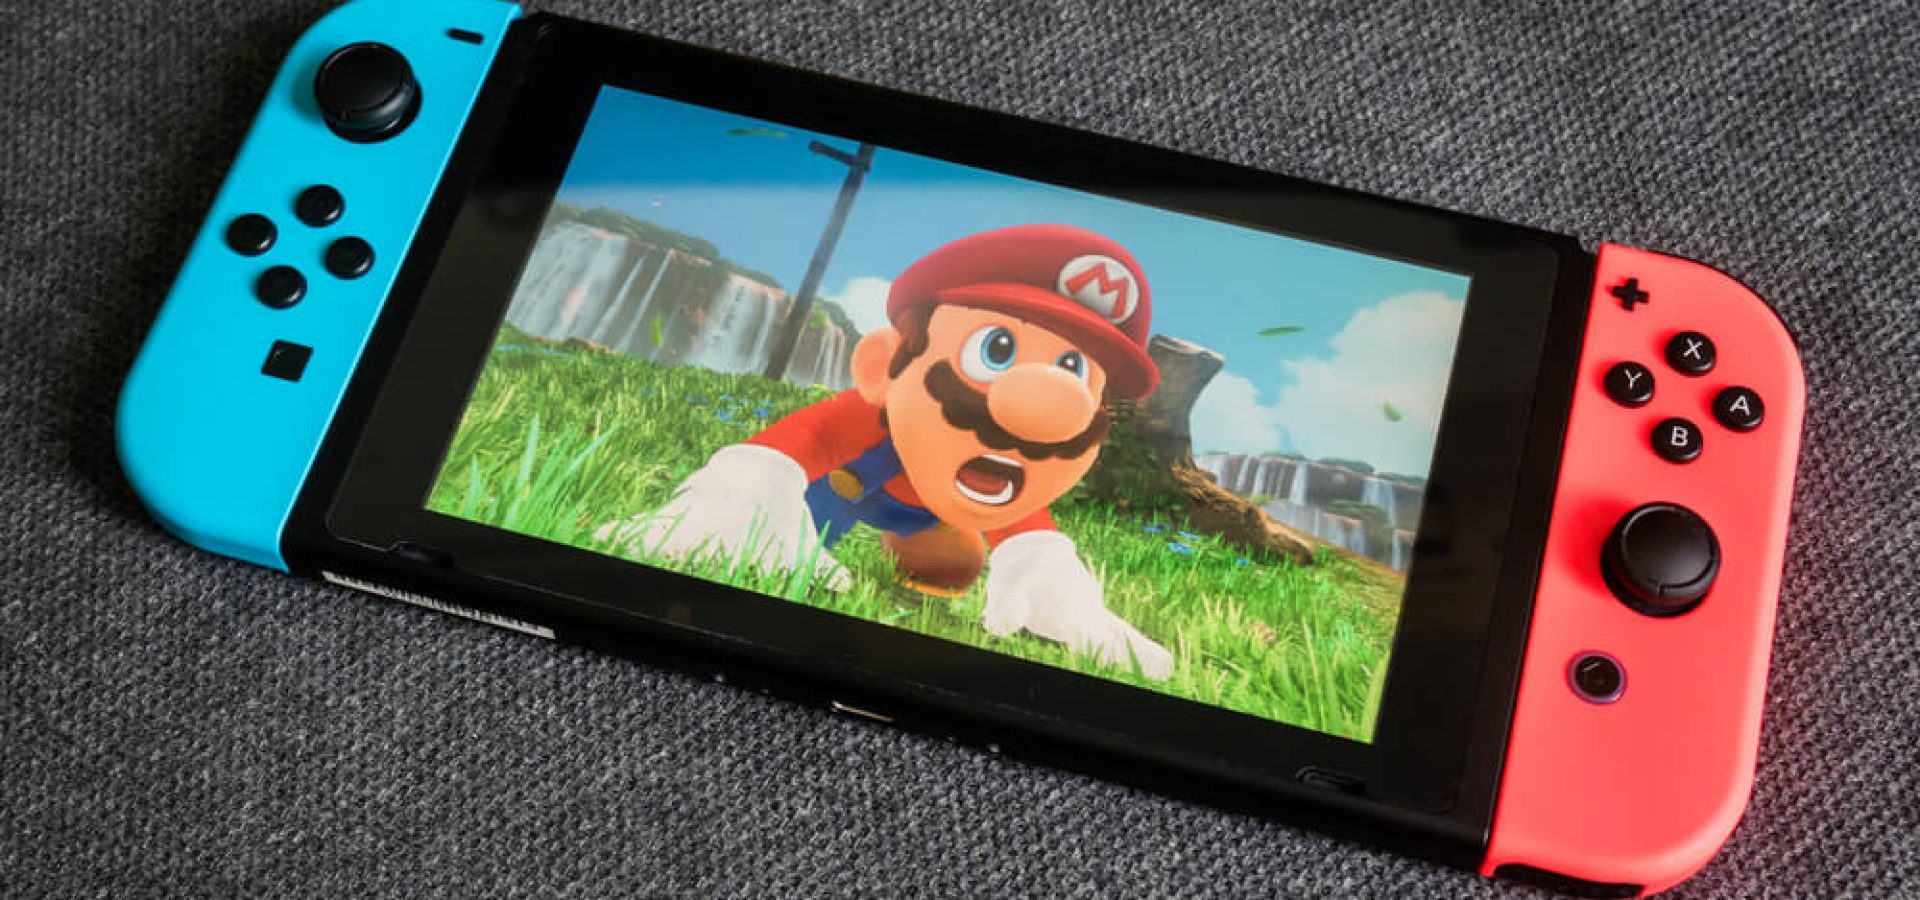 Mario: Nintendo Switch showing its screen with Super Mario.